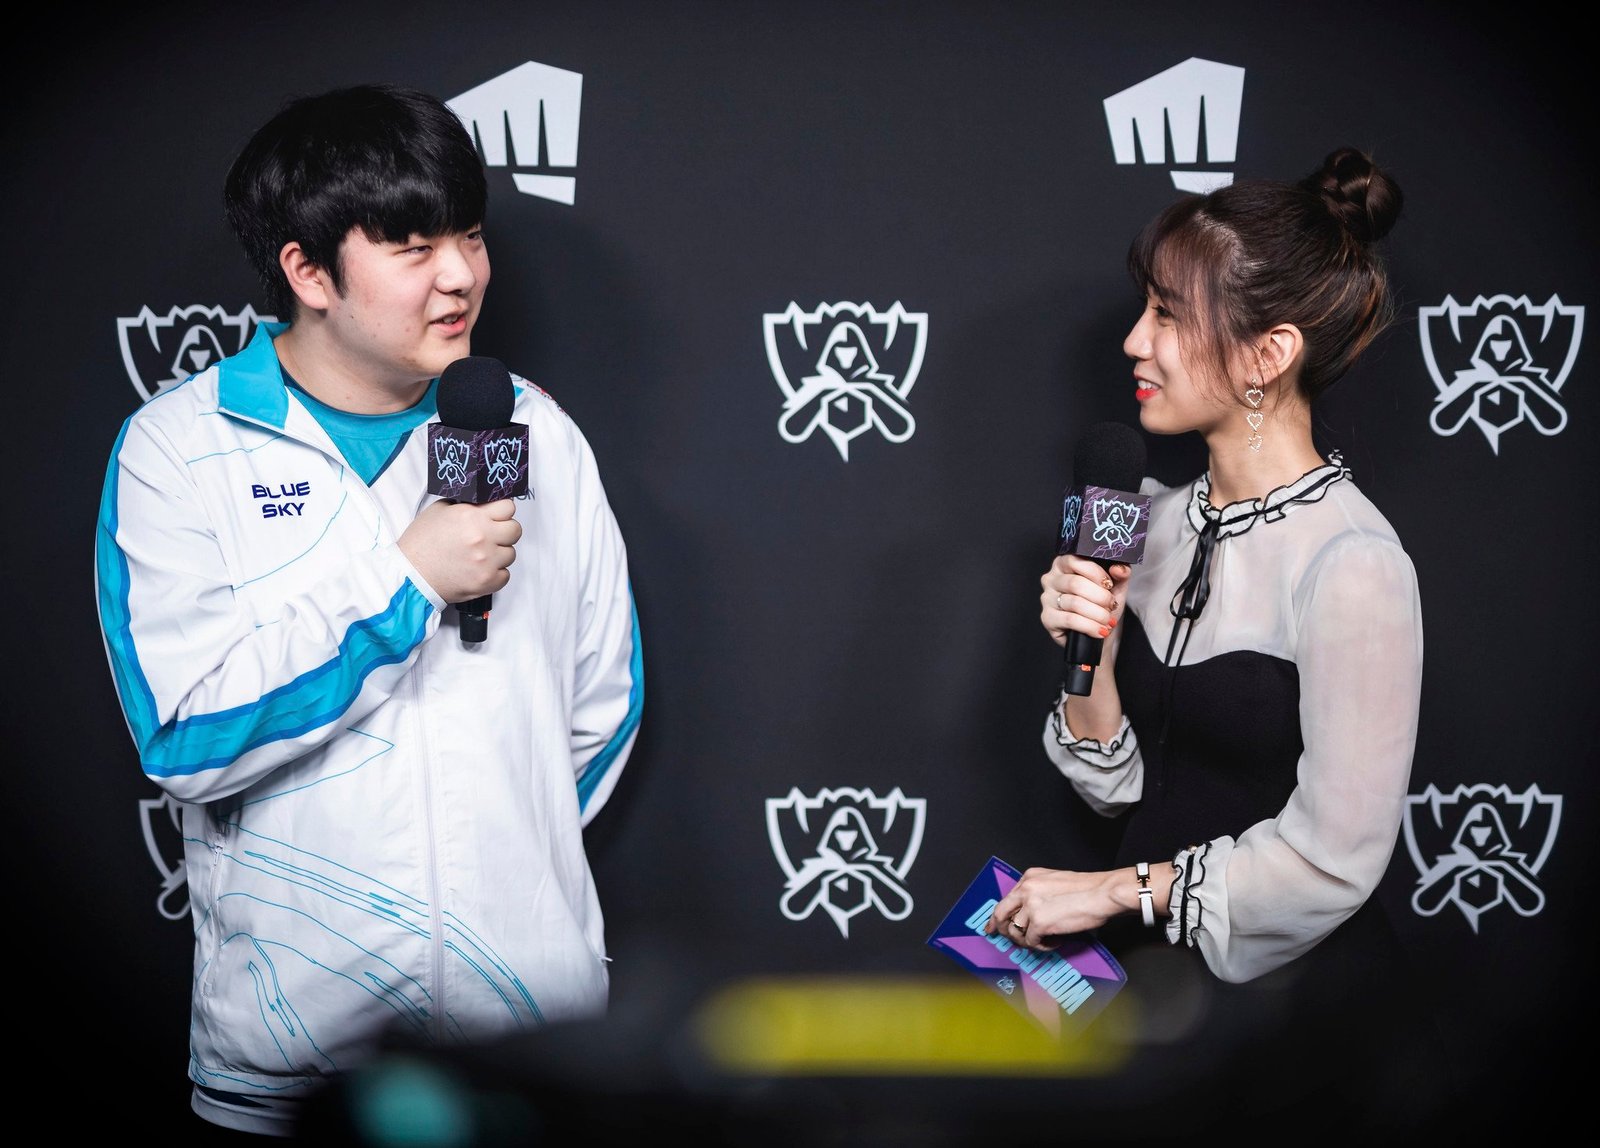 NA remains winless while Korea stands undefeated through day 2 of Worlds 2020